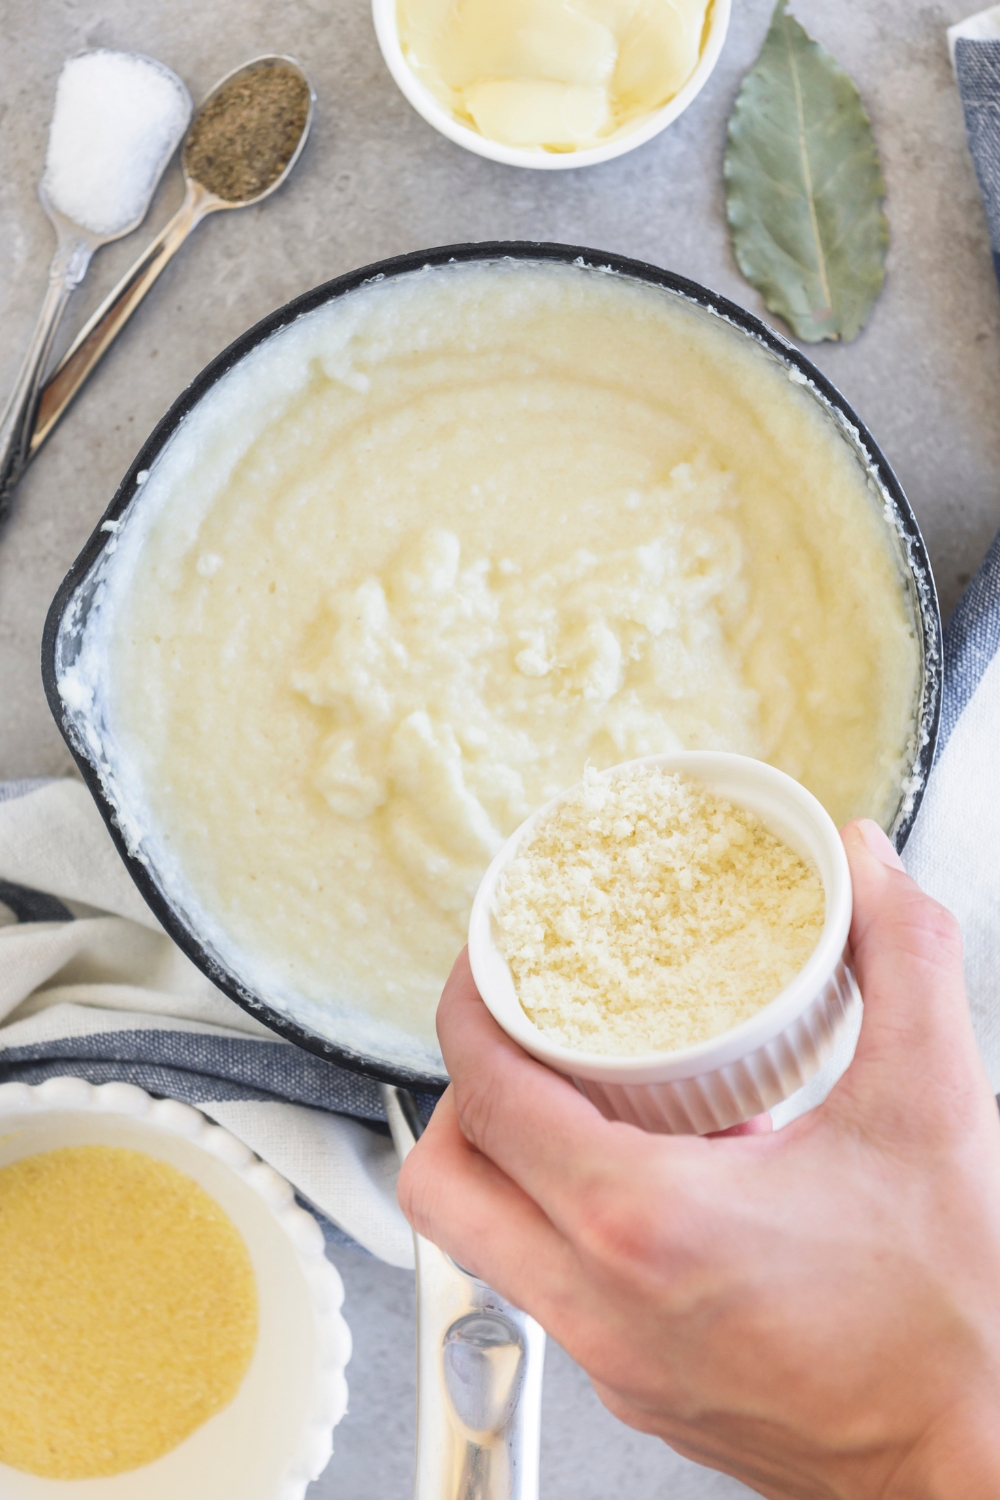 Someone pours a small ramekin of cheese into a saucepan full of grits. Seasonings and a bay leaf are on the counter next to the pan.